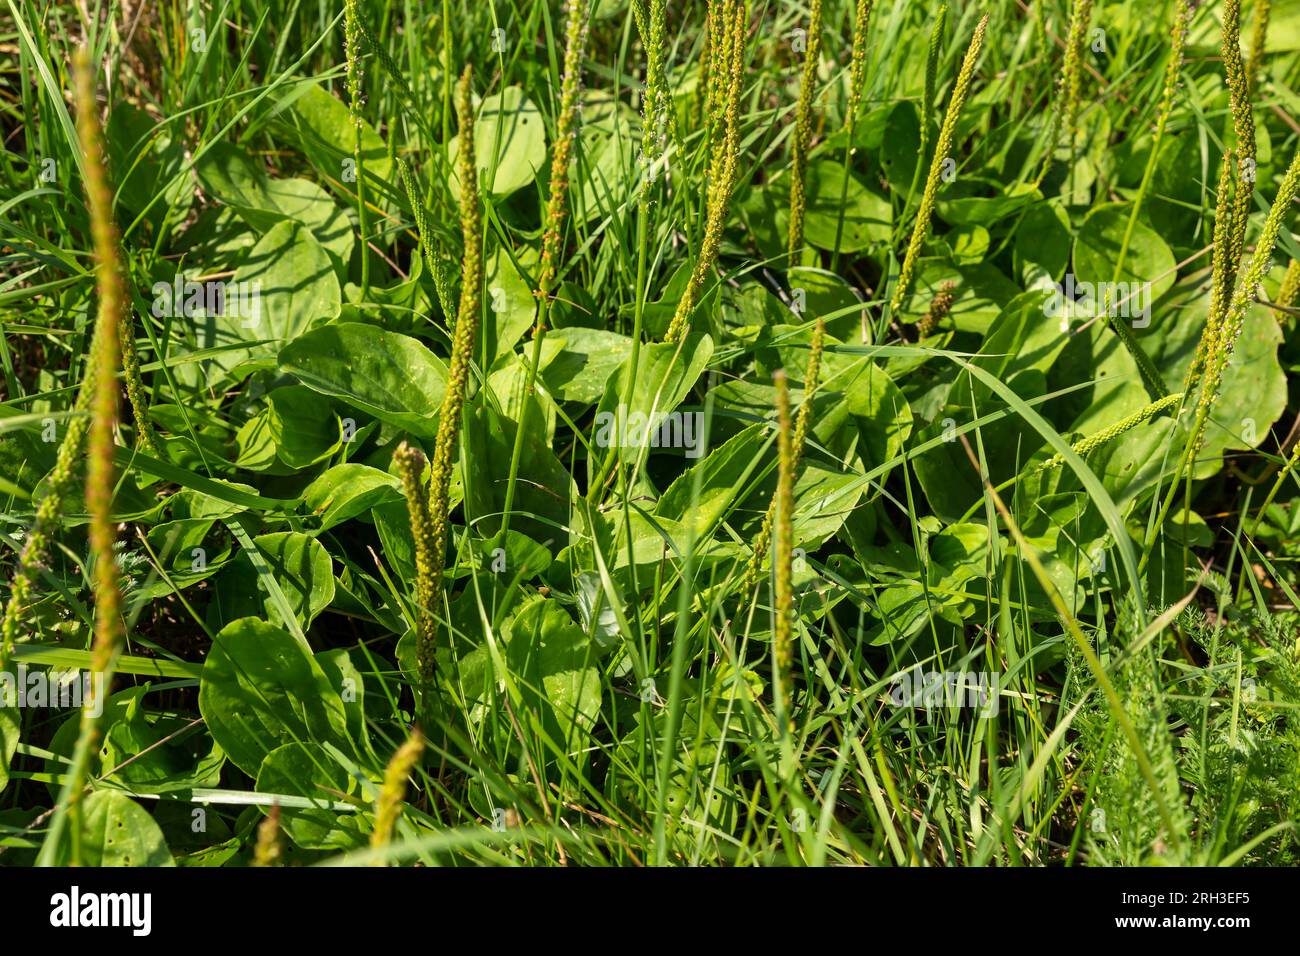 Fresh green leaves of plantain. Broadleaf plantain plant, Plantago major. Meadow grass with green leaves and flowers close-up. Stock Photo